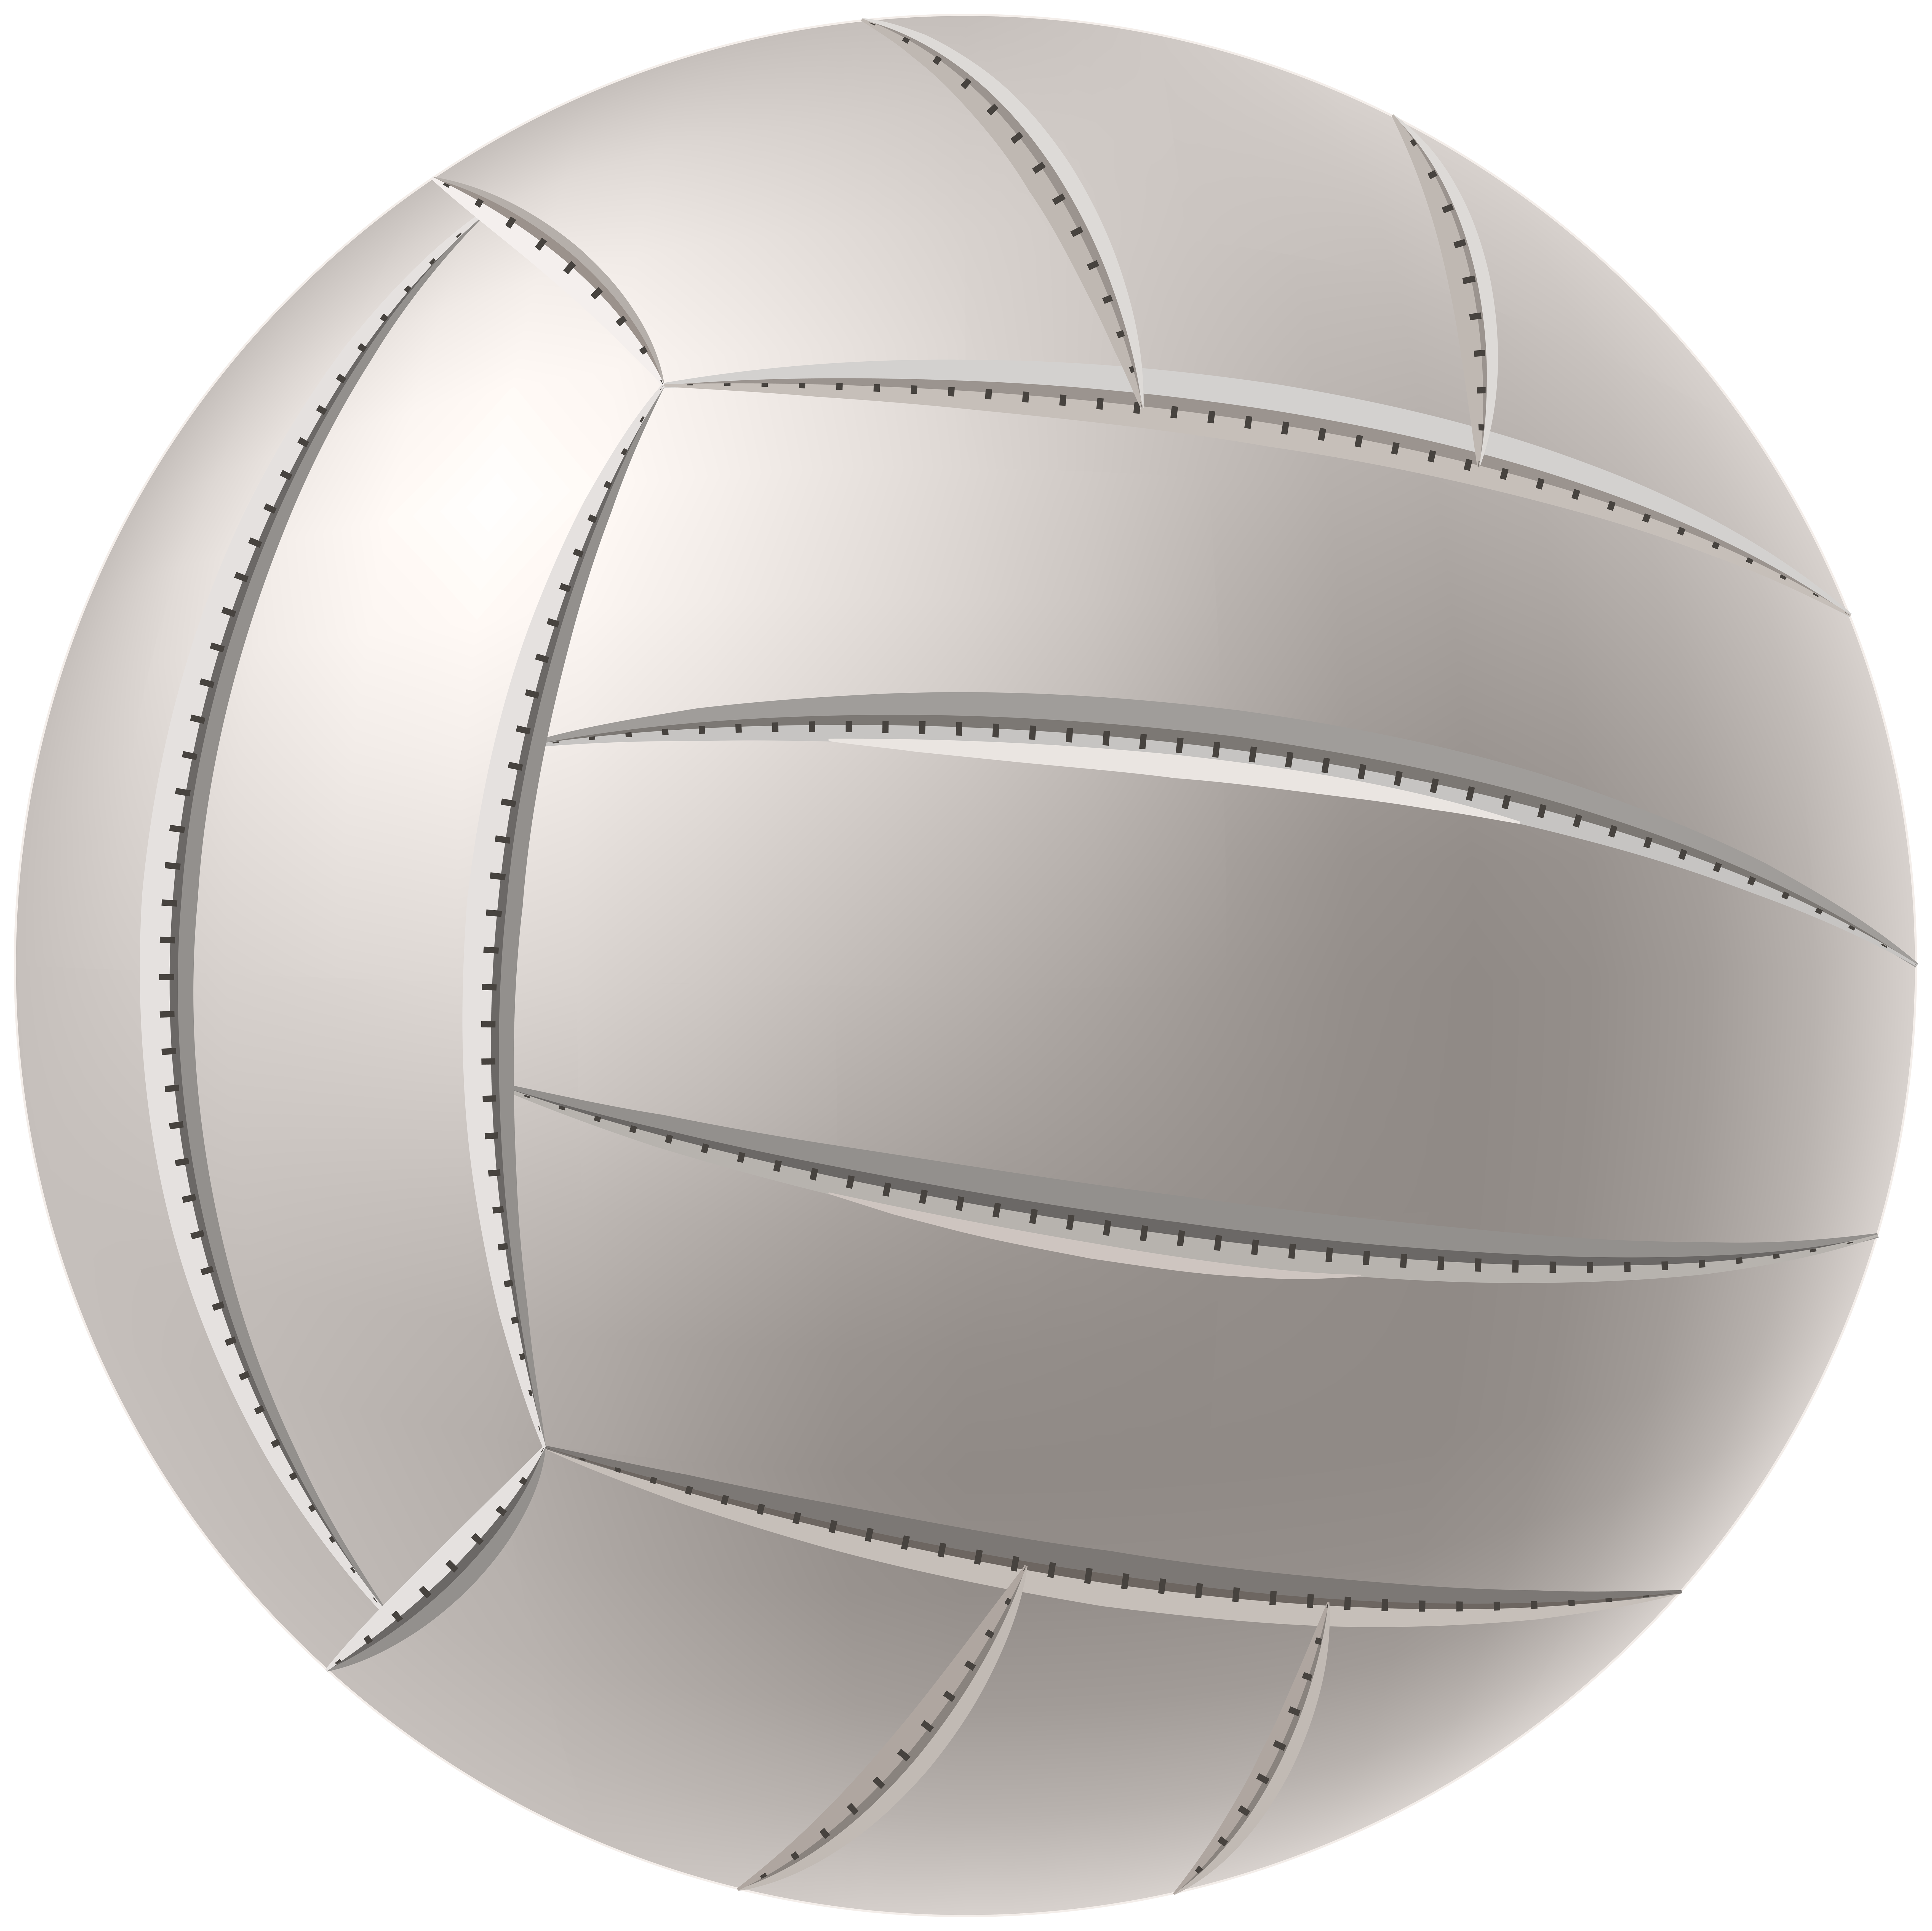 volleyball clipart png - photo #11